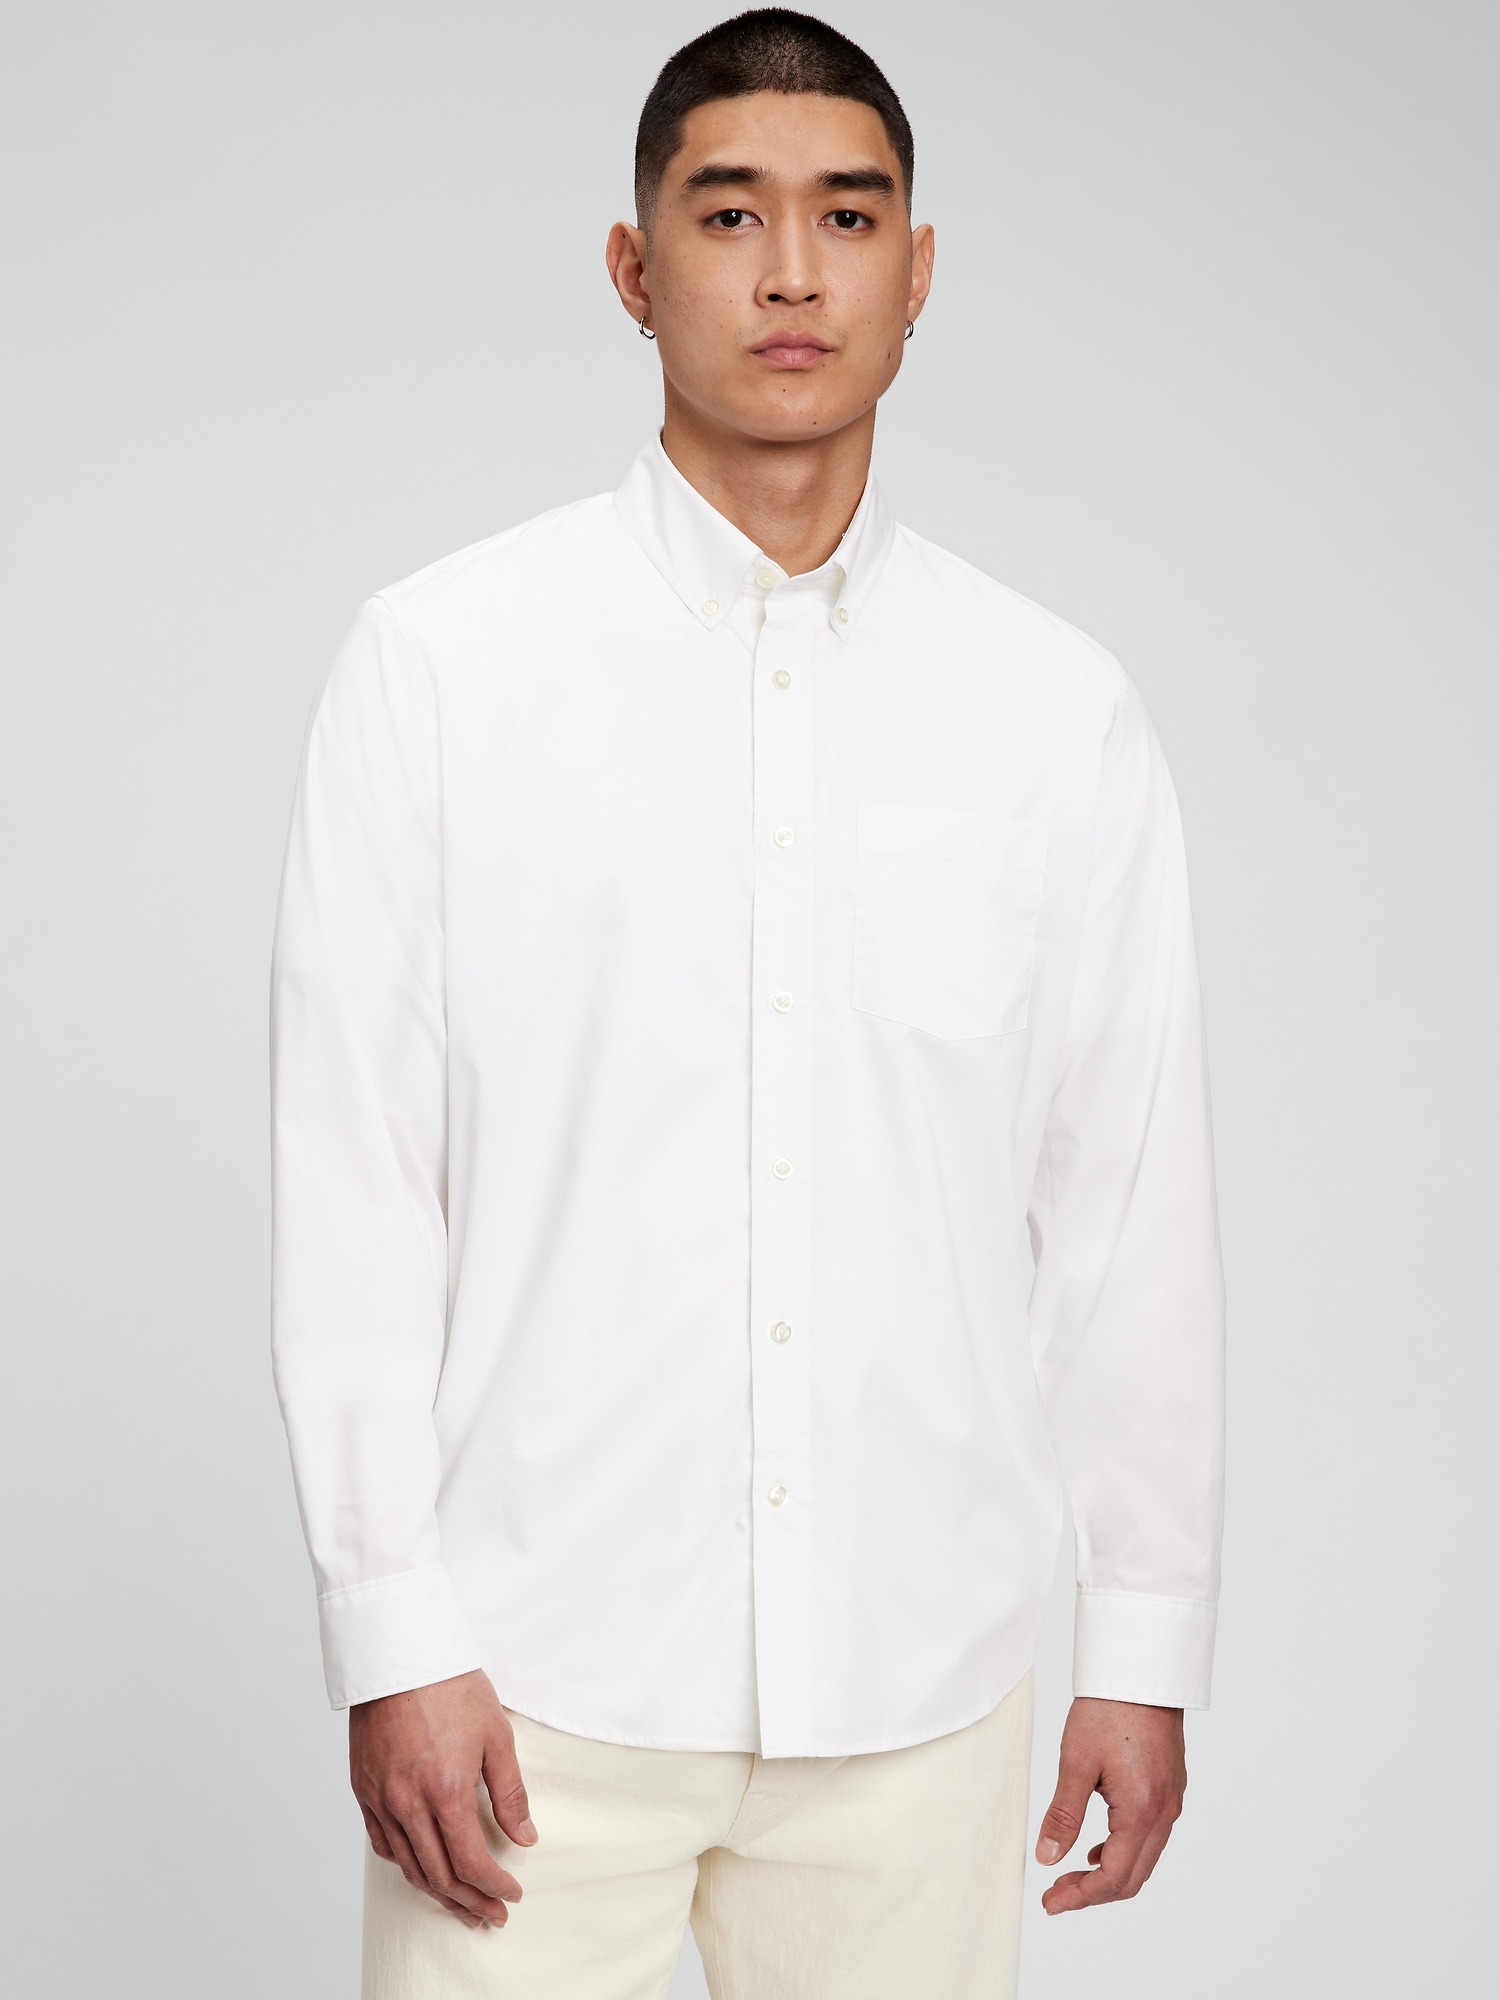 All-Day Poplin Shirt in Untucked Fit | Gap